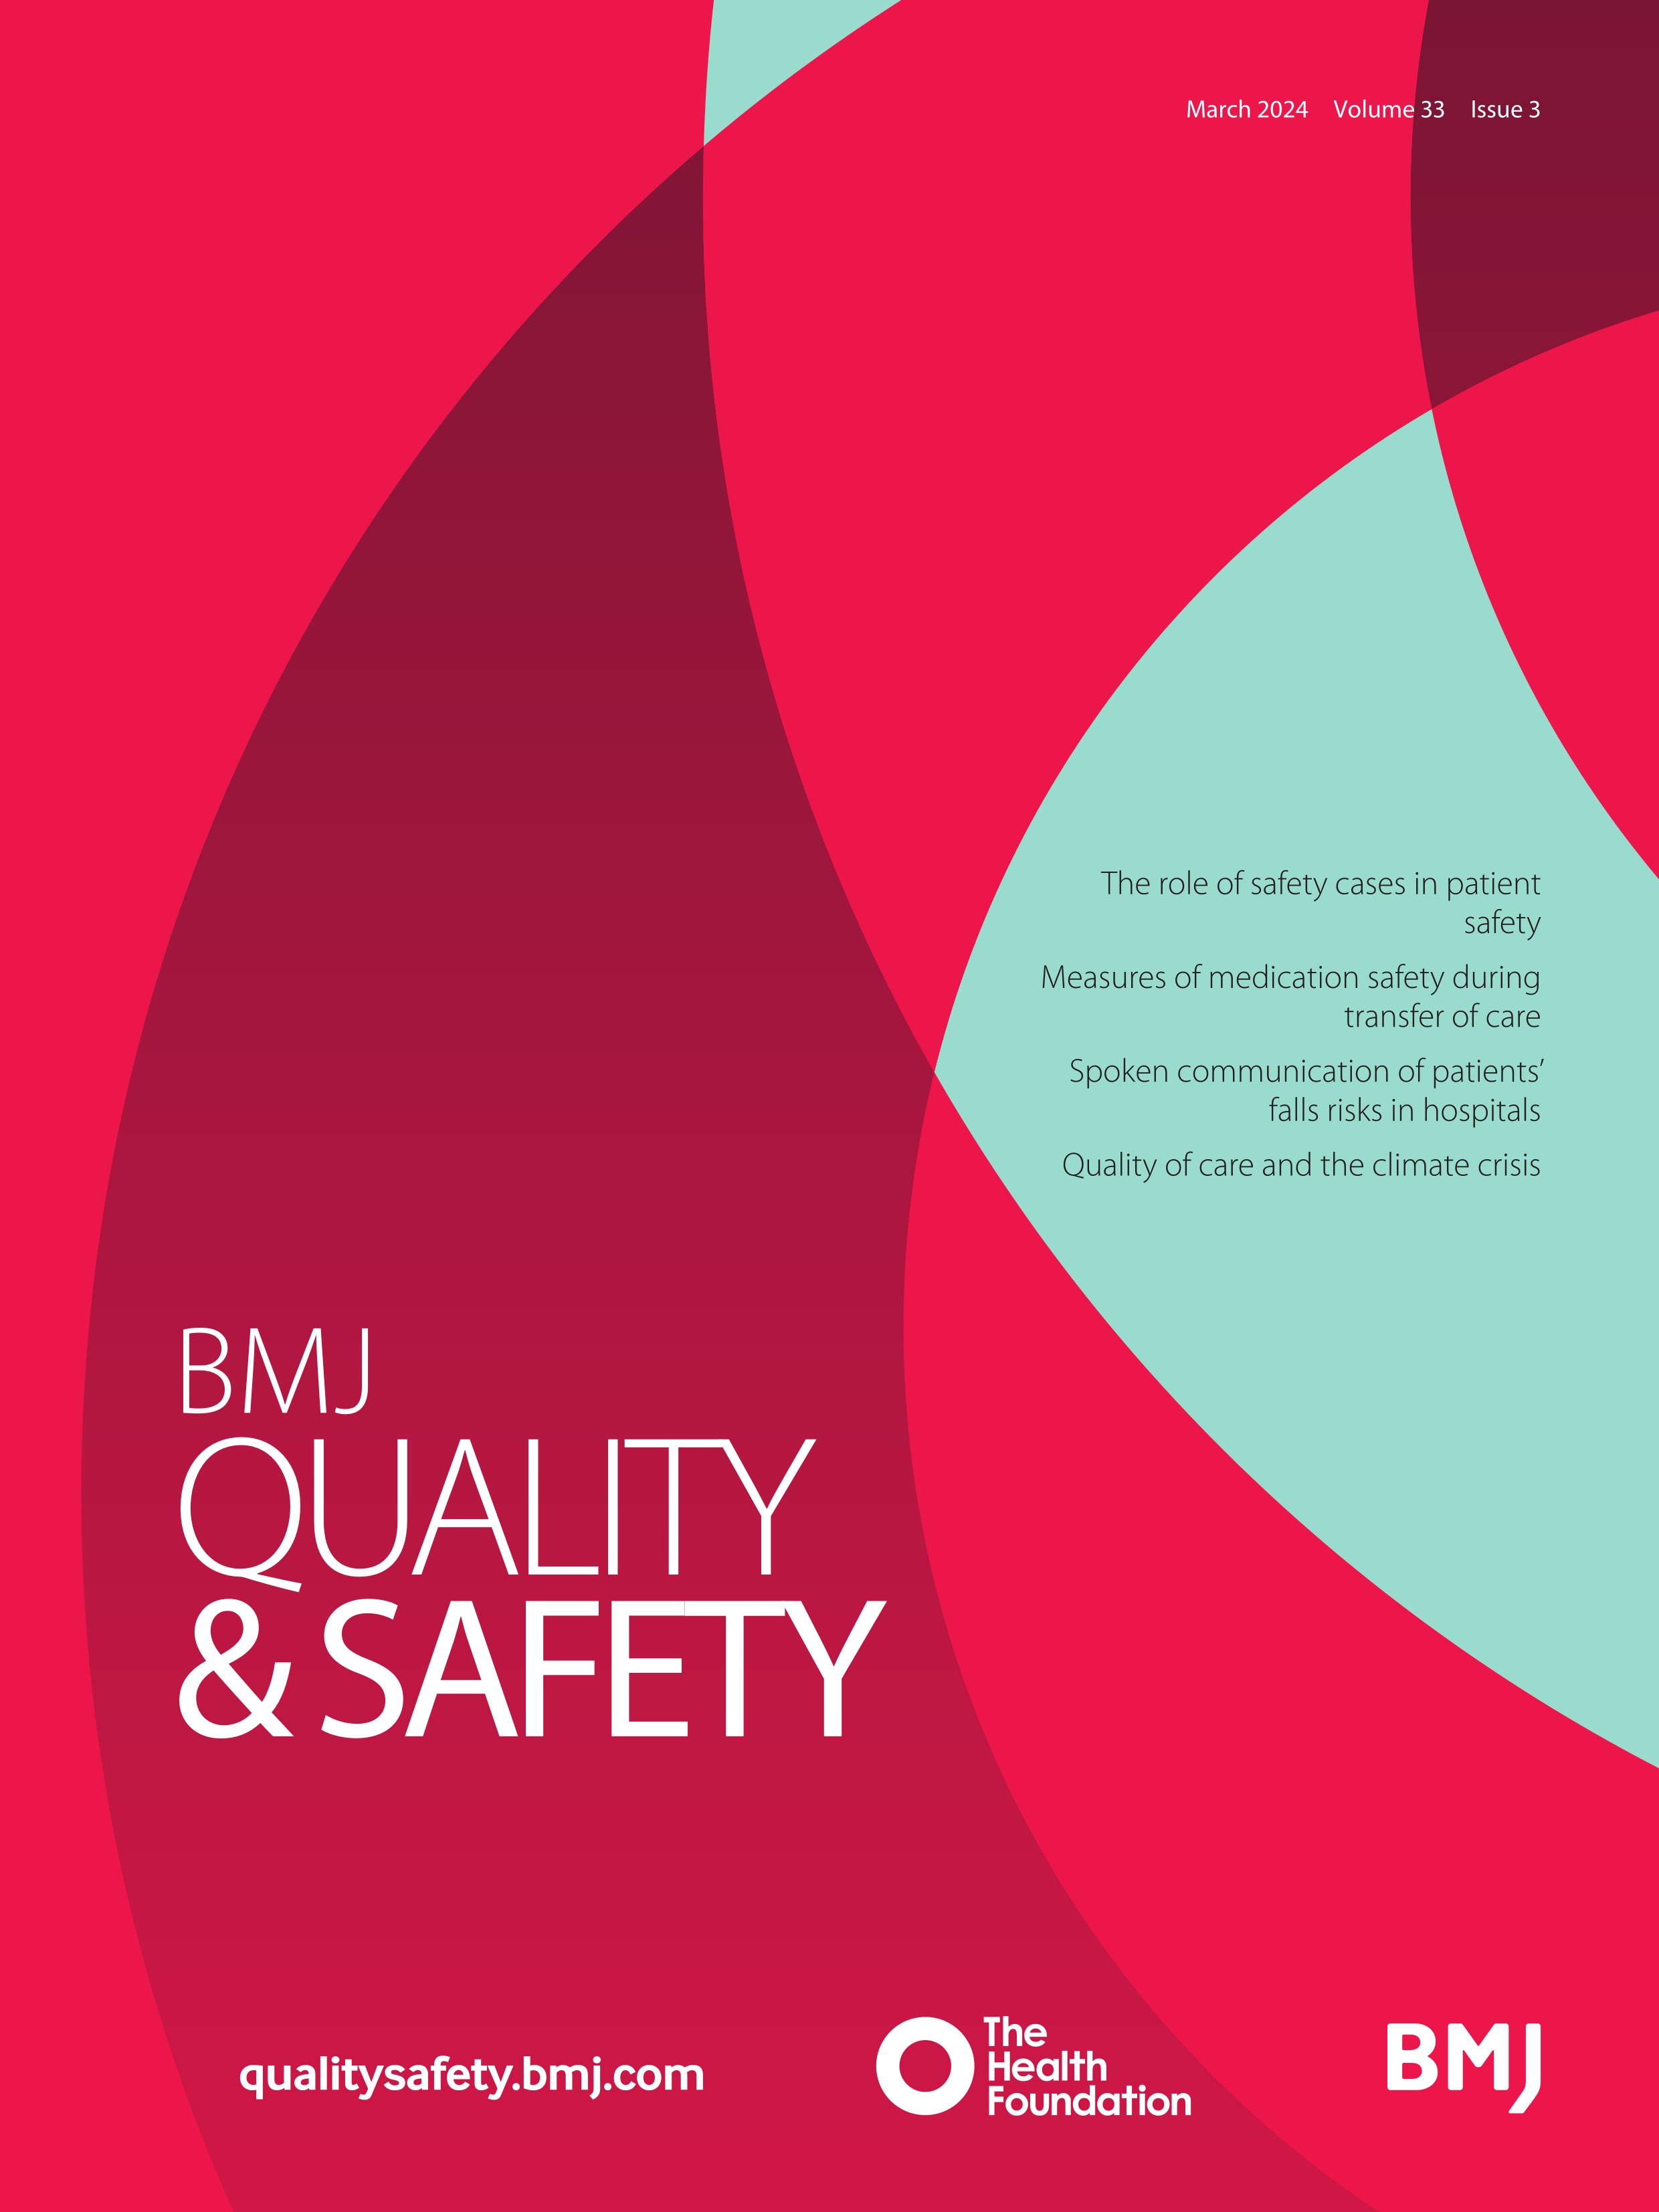 Our mission and how we hope to move the field forward: statement from the BMJ Quality & Safety senior editorial team 2023